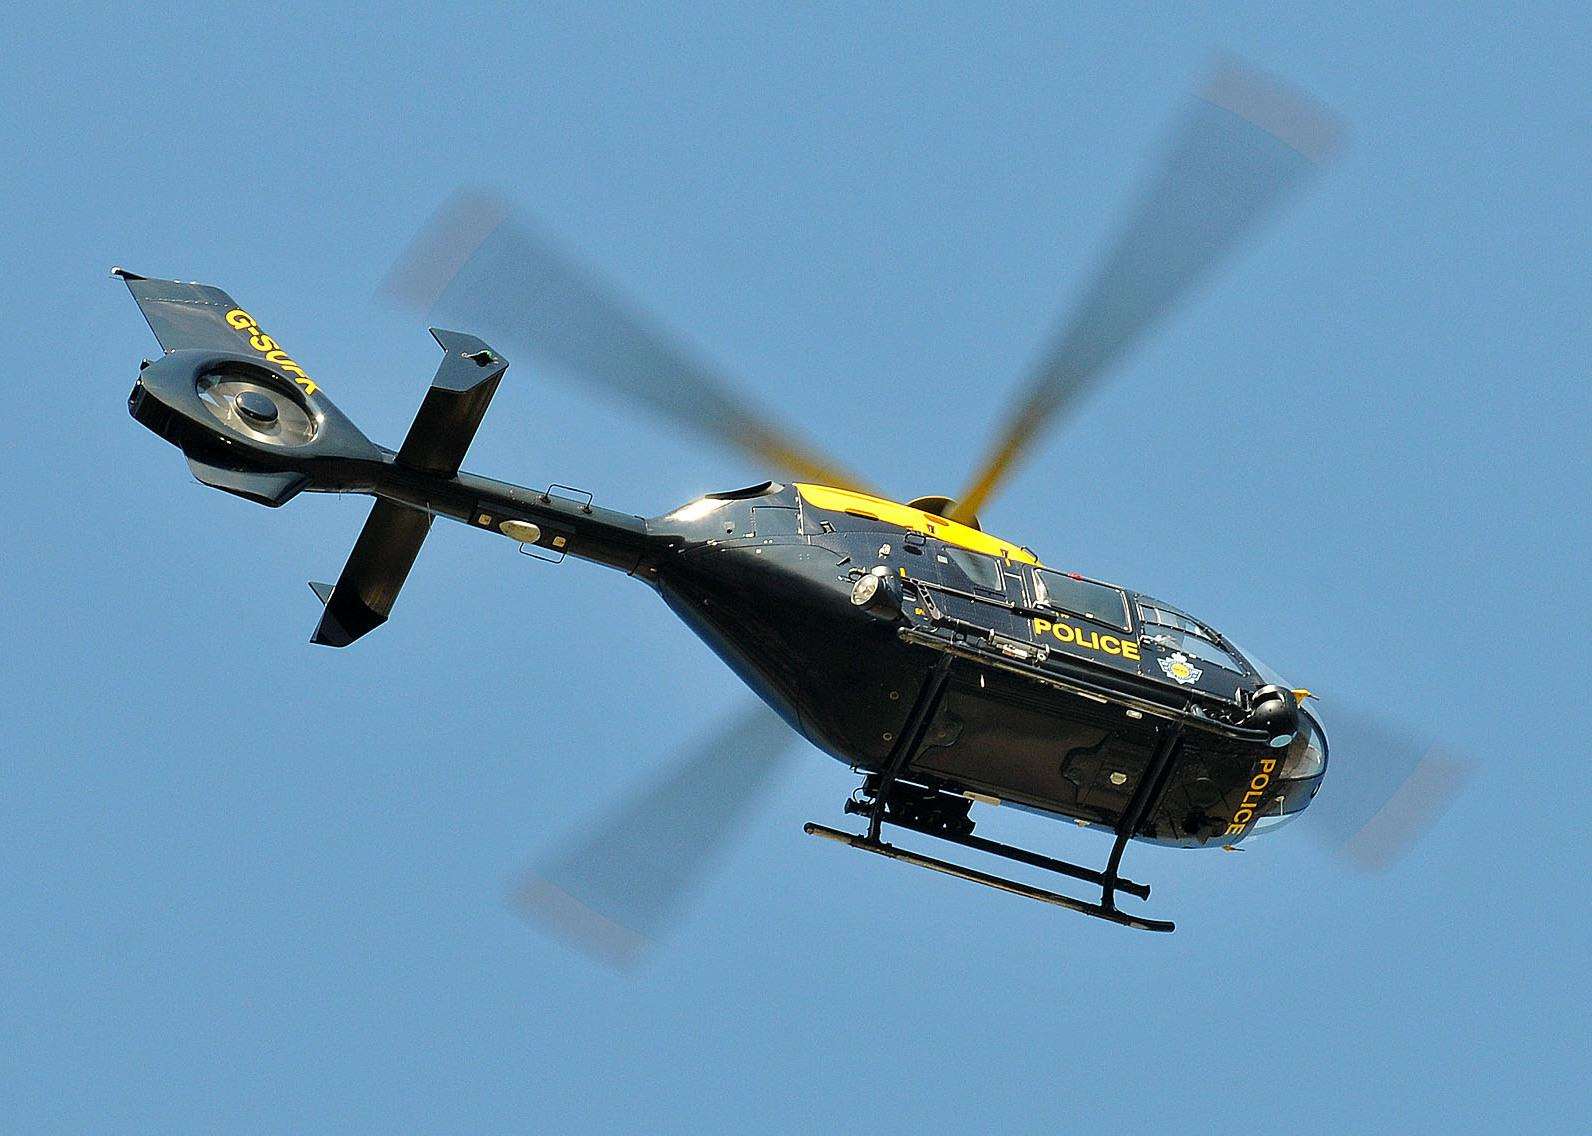 The police helicopter was involved in the search